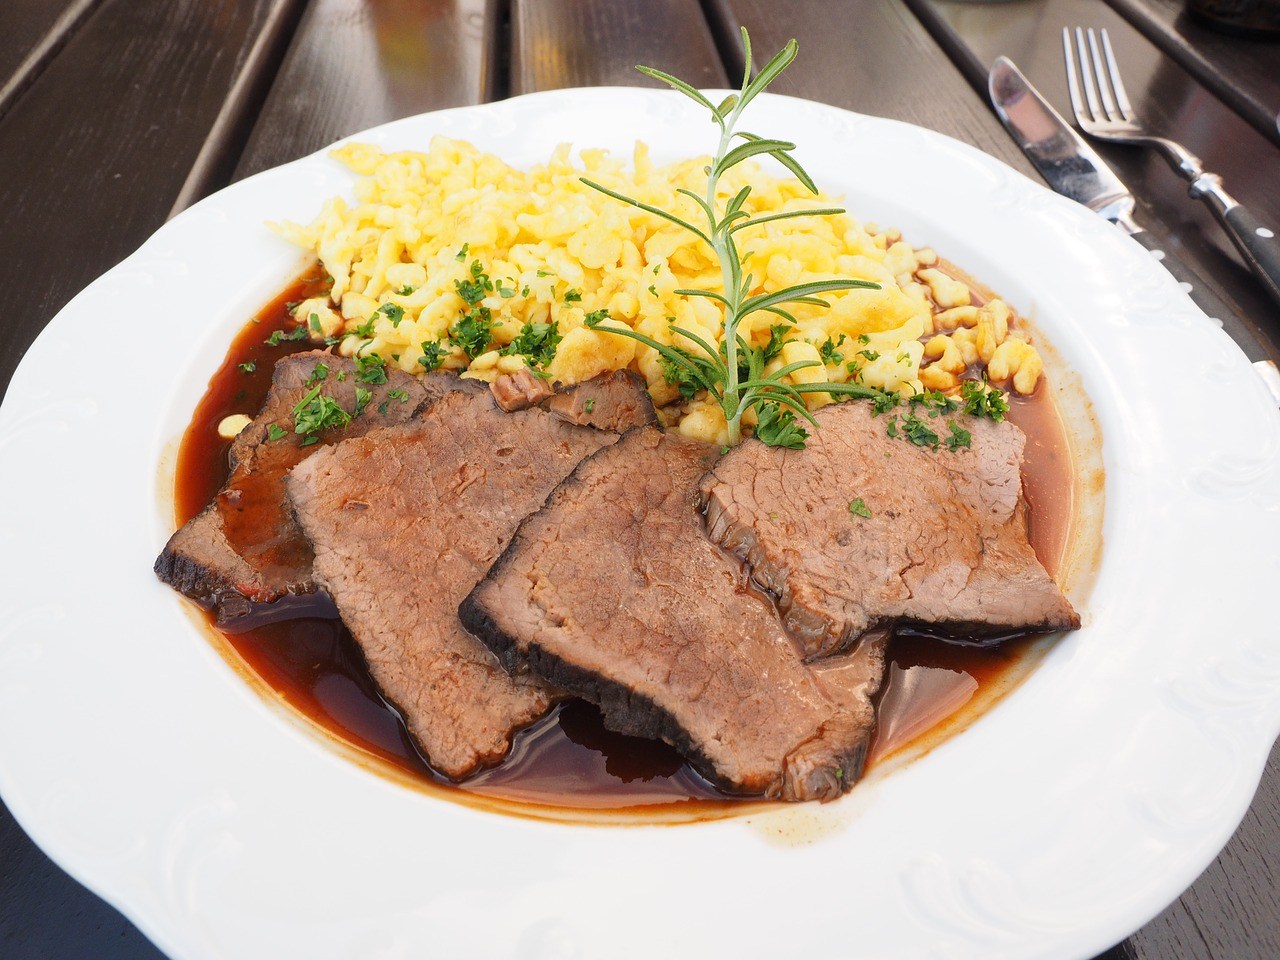 How Close to 20/20 Can You Get on This General Knowledge Test? Sauerbraten